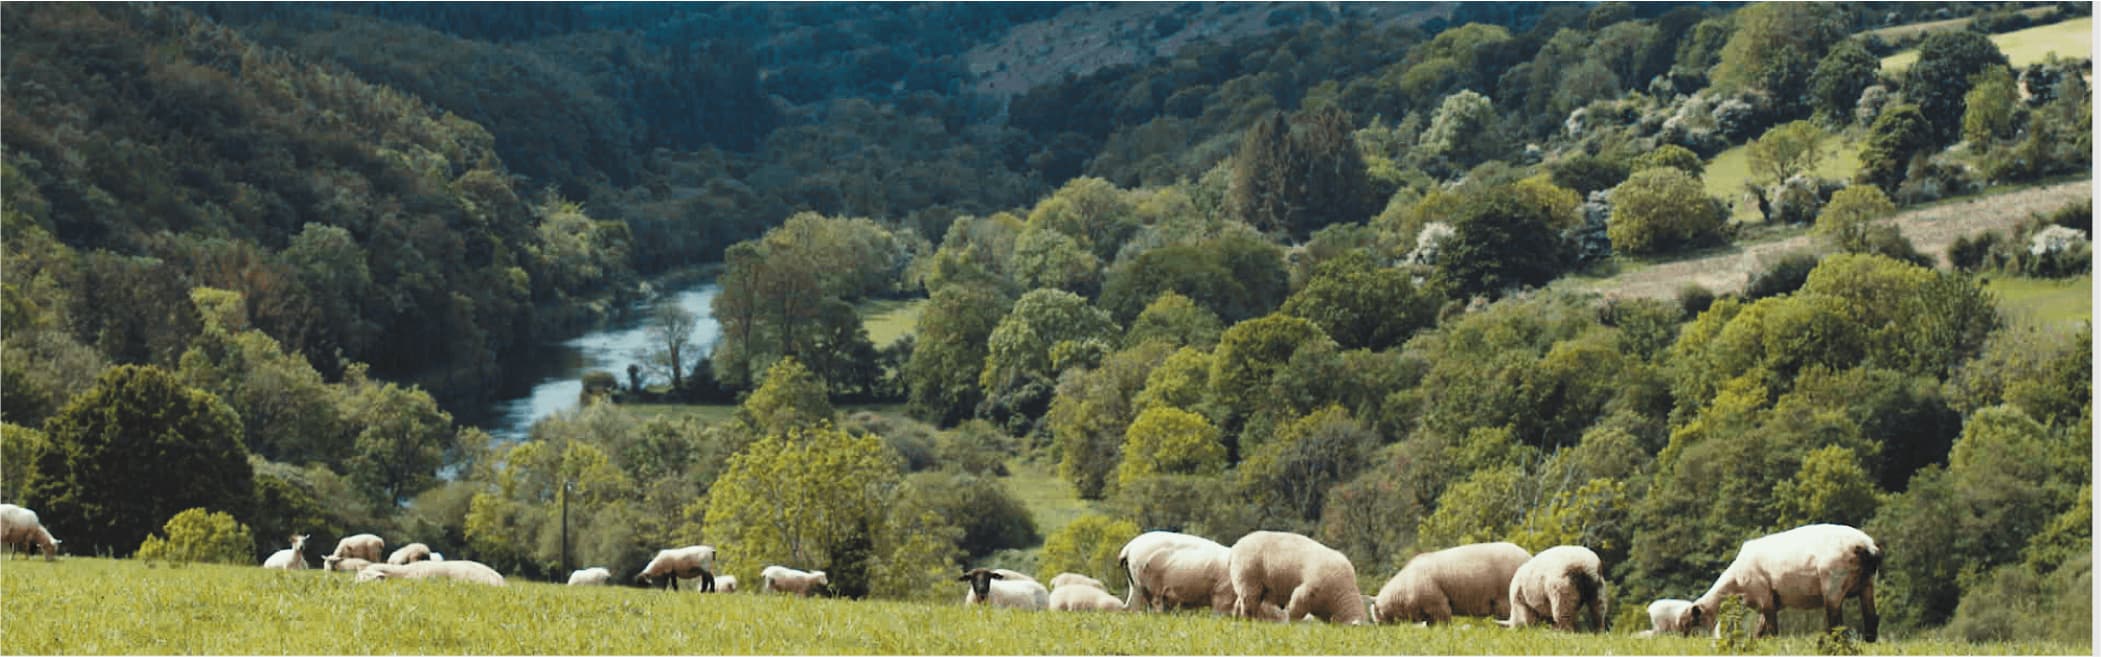 Green Kilkenny valley with a field of lambs in the foreground